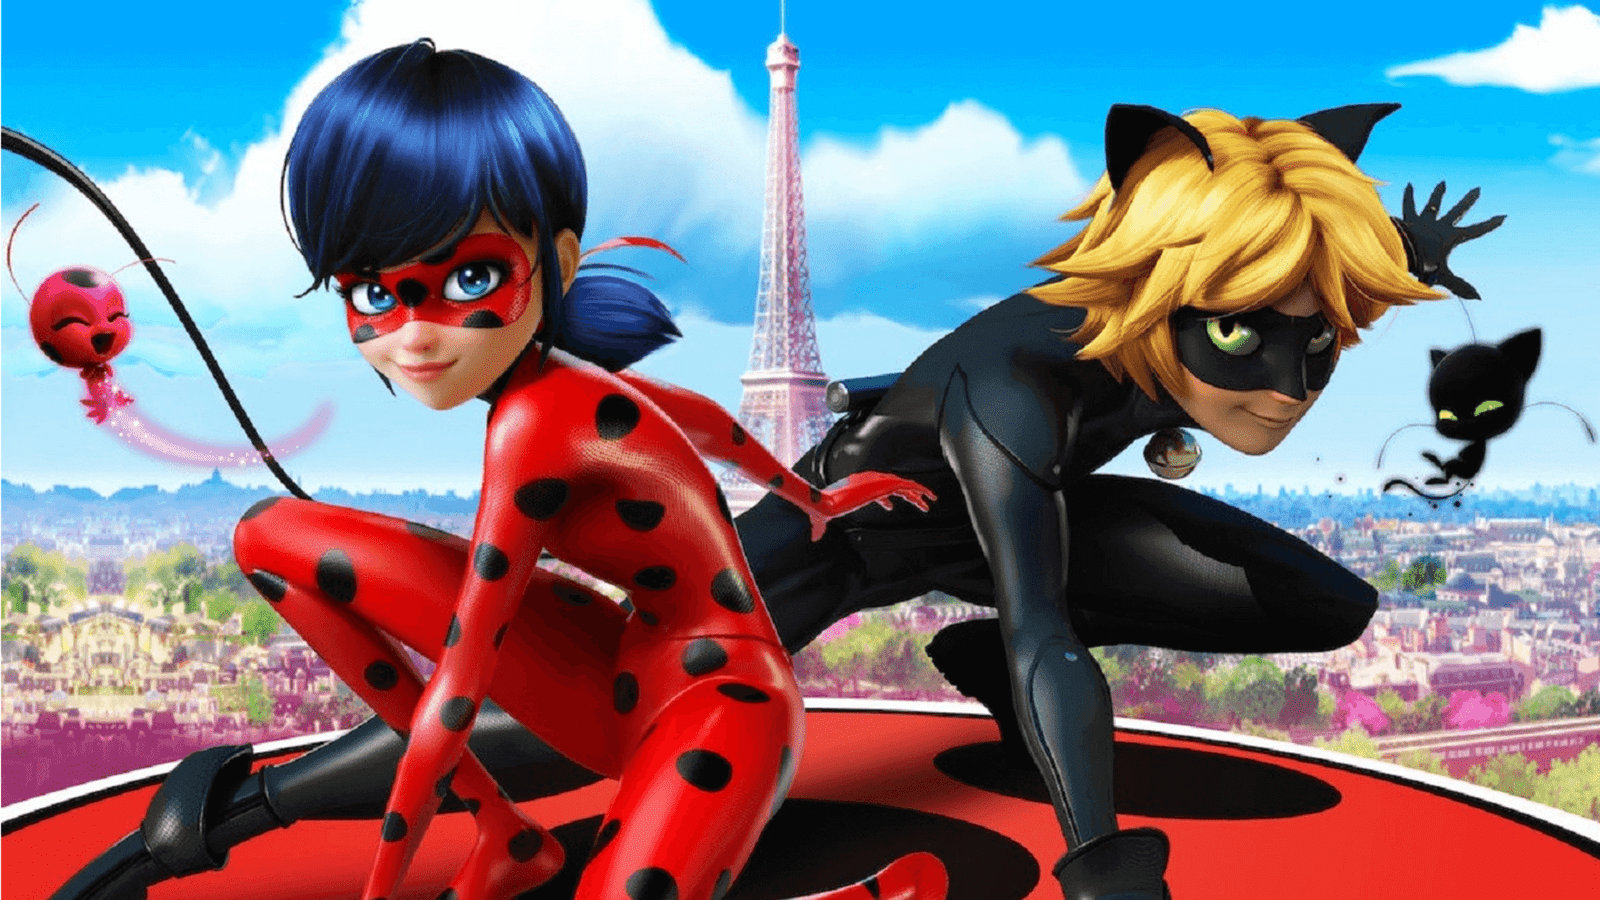 A Miraculous Ladybug Is Finally Here! Awaiting For The Release